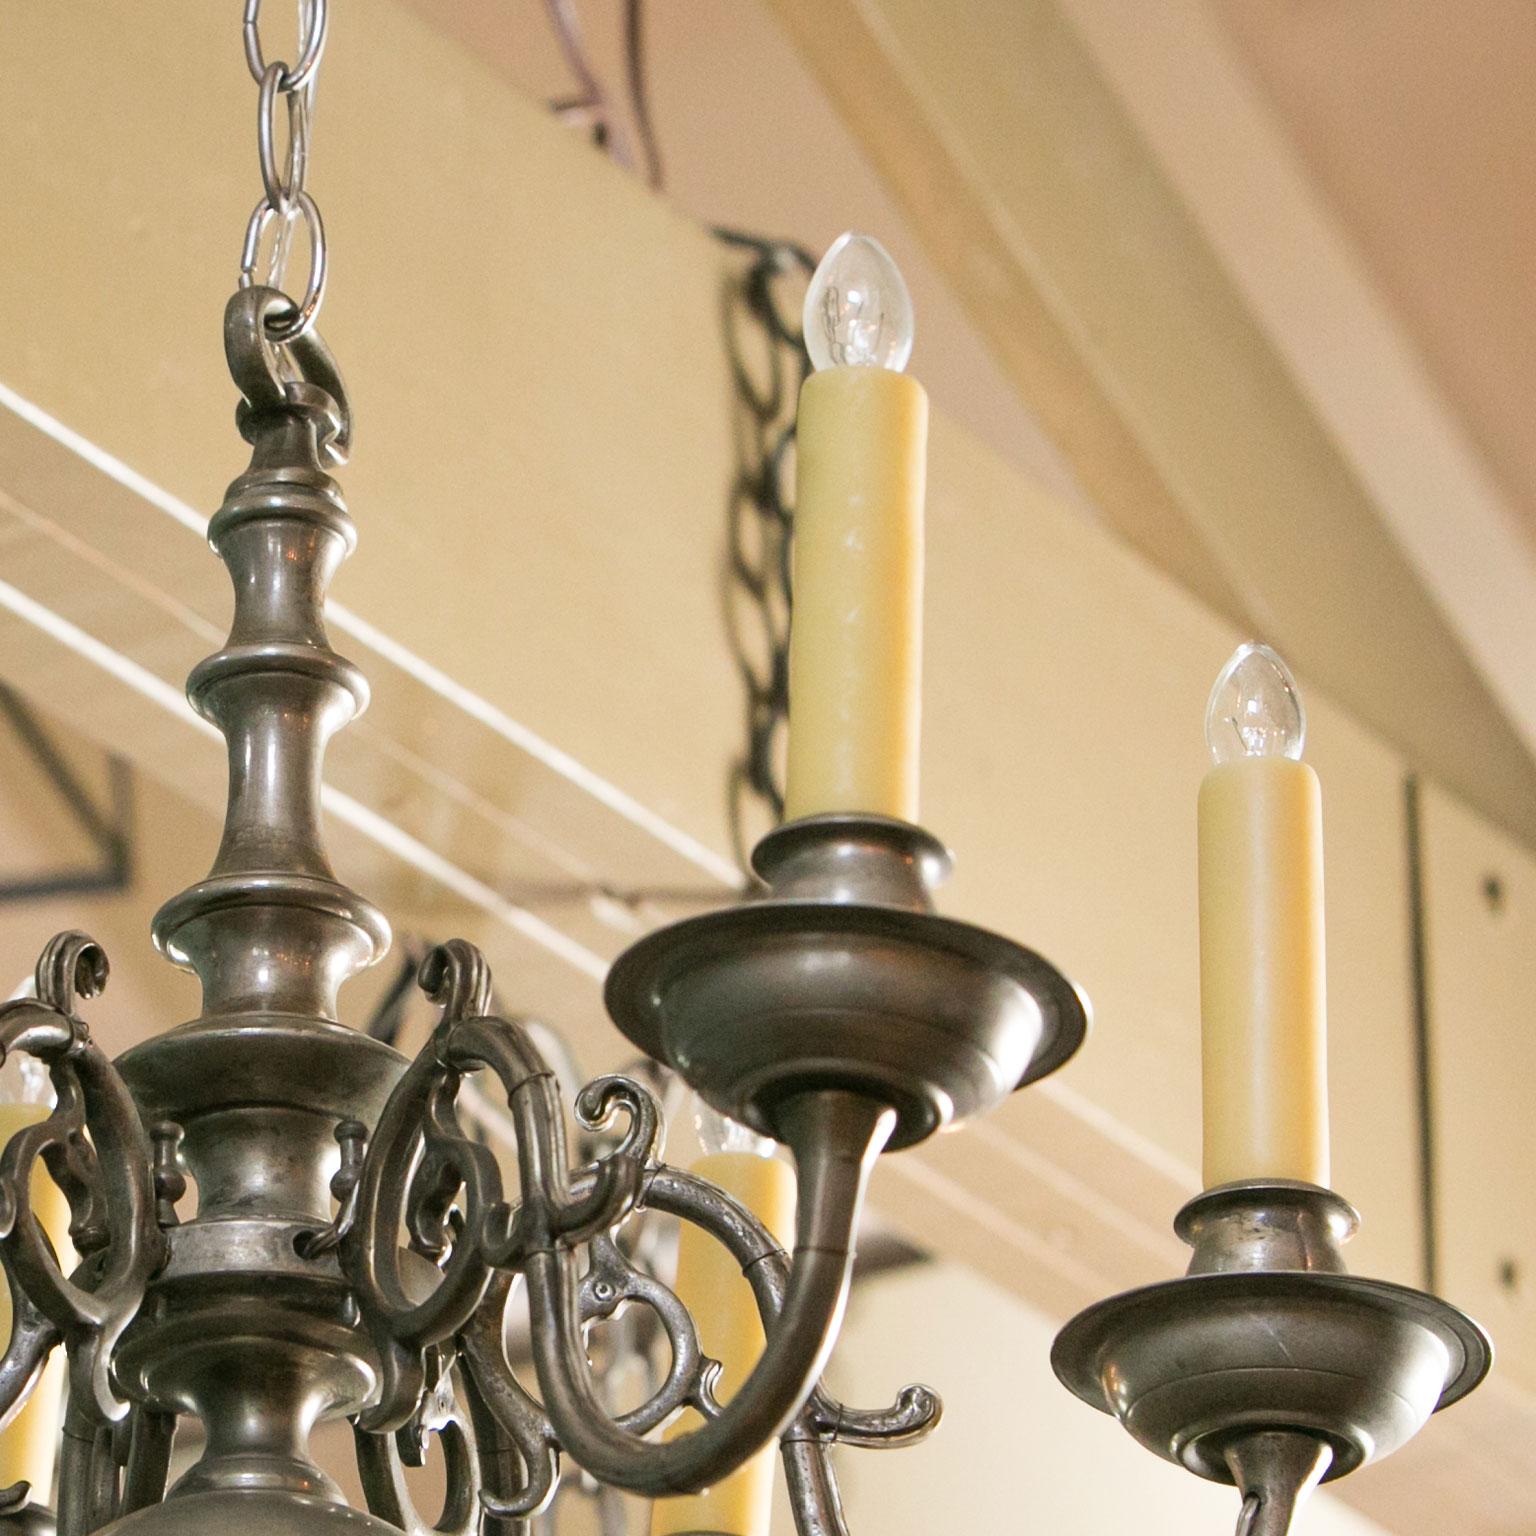 Georgian style classic chandelier with six arms. This nickel-on-bronze chandelier has a beautiful patina that has a bit of a pewter color, but is much harder and heavier than pewter. This vintage Flemish-style light is a true Classic that has a